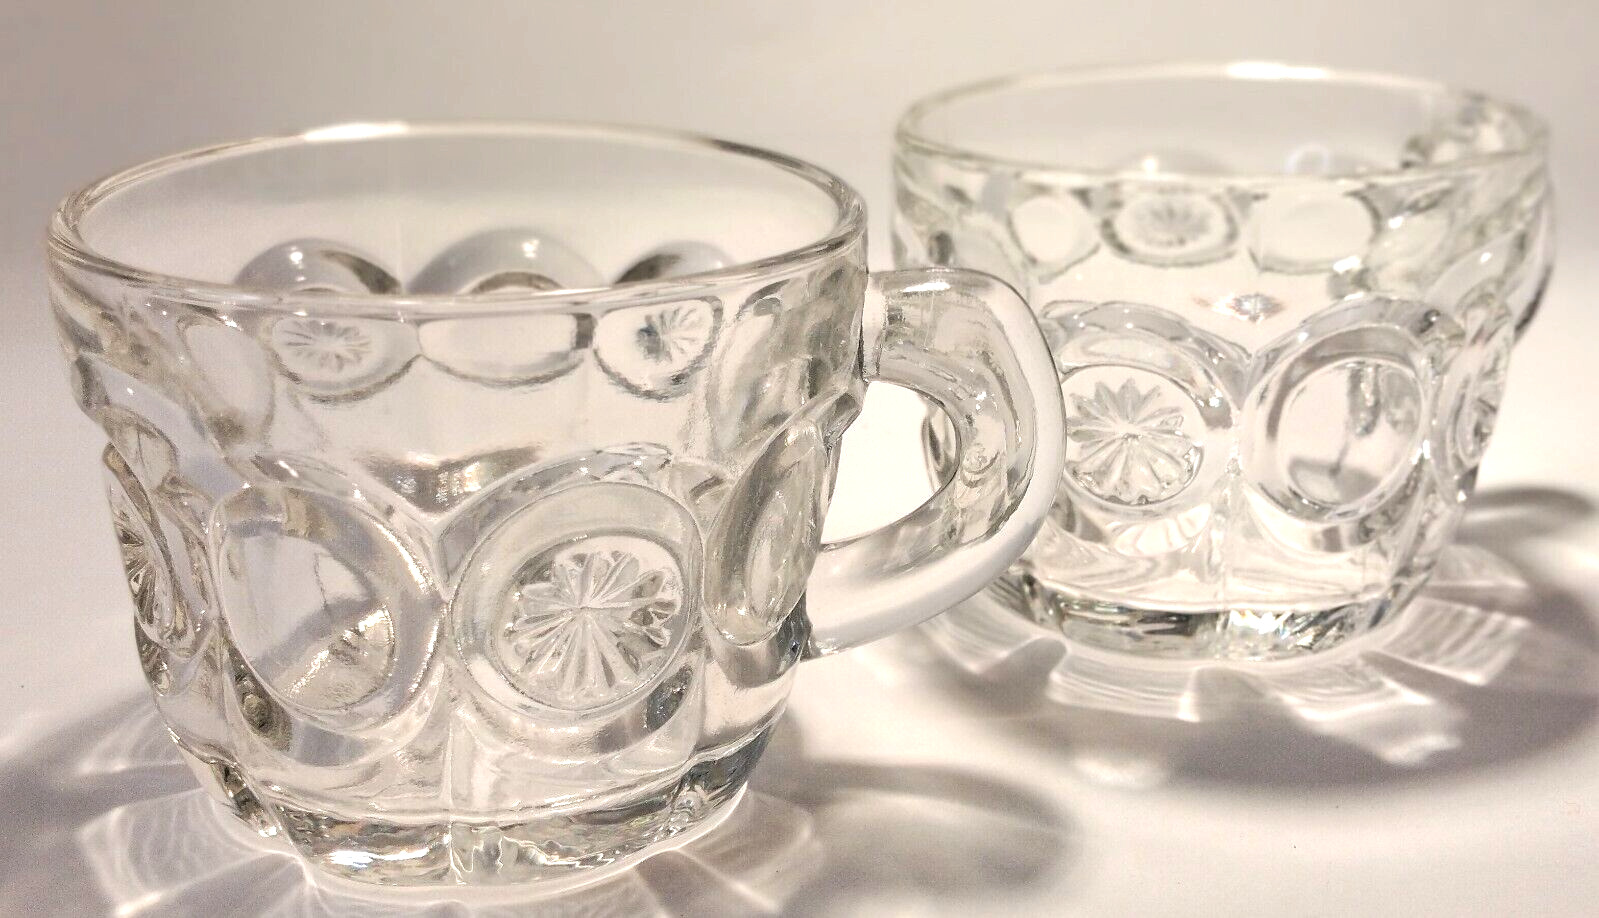 Vintage Punch Bowl Cups Set of 2 Clear Pressed Glass Moon and Stars Pattern